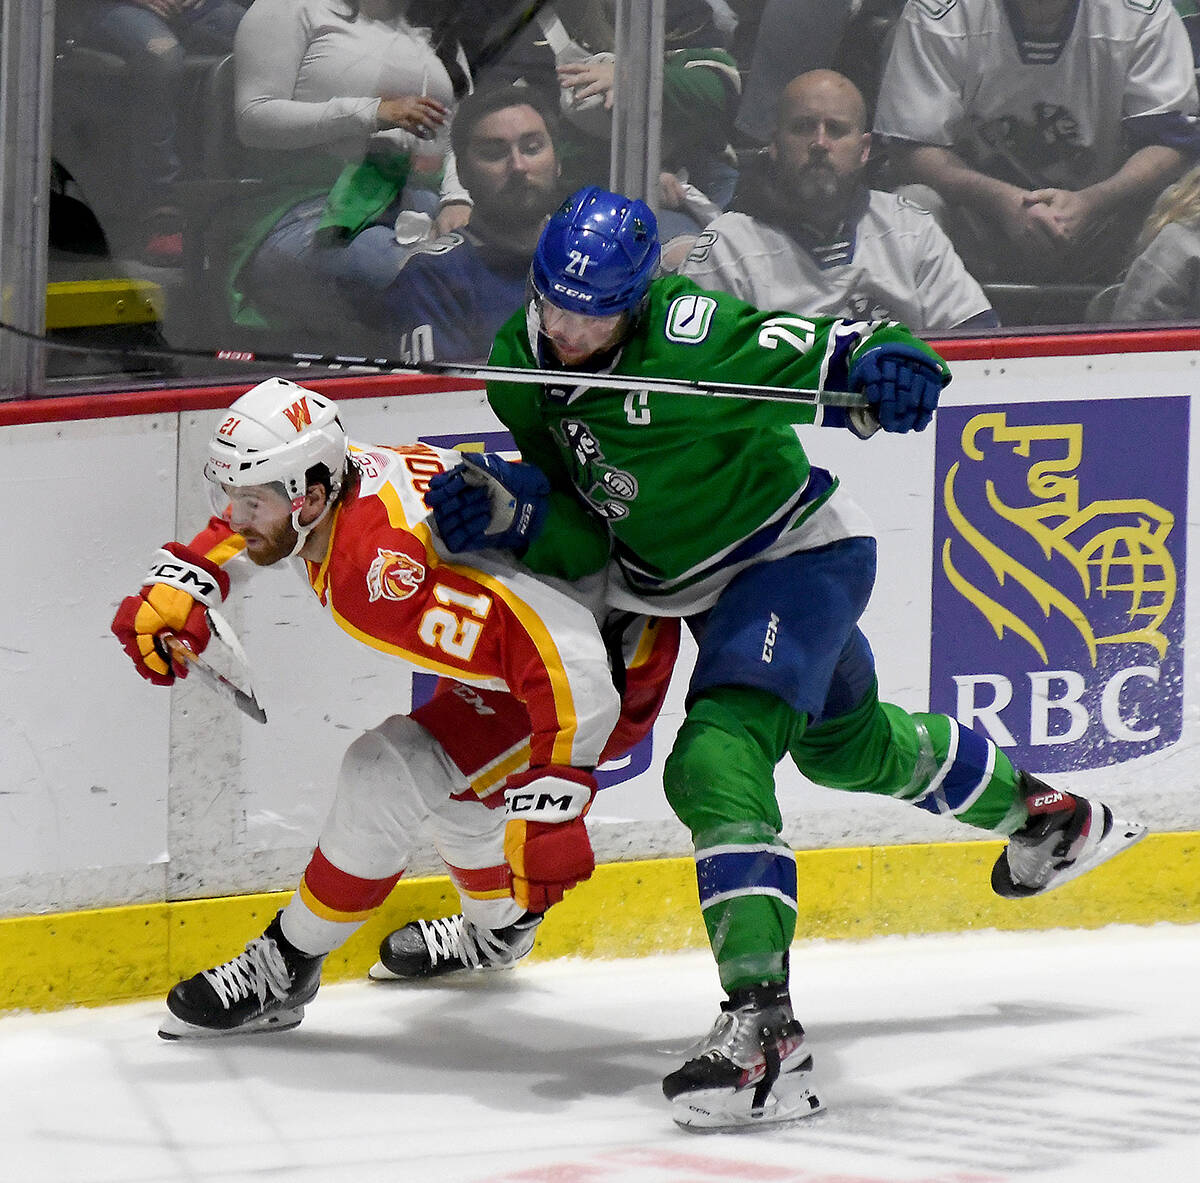 Canucks 5 Flames 3: Top prospects put on a show in Calgary